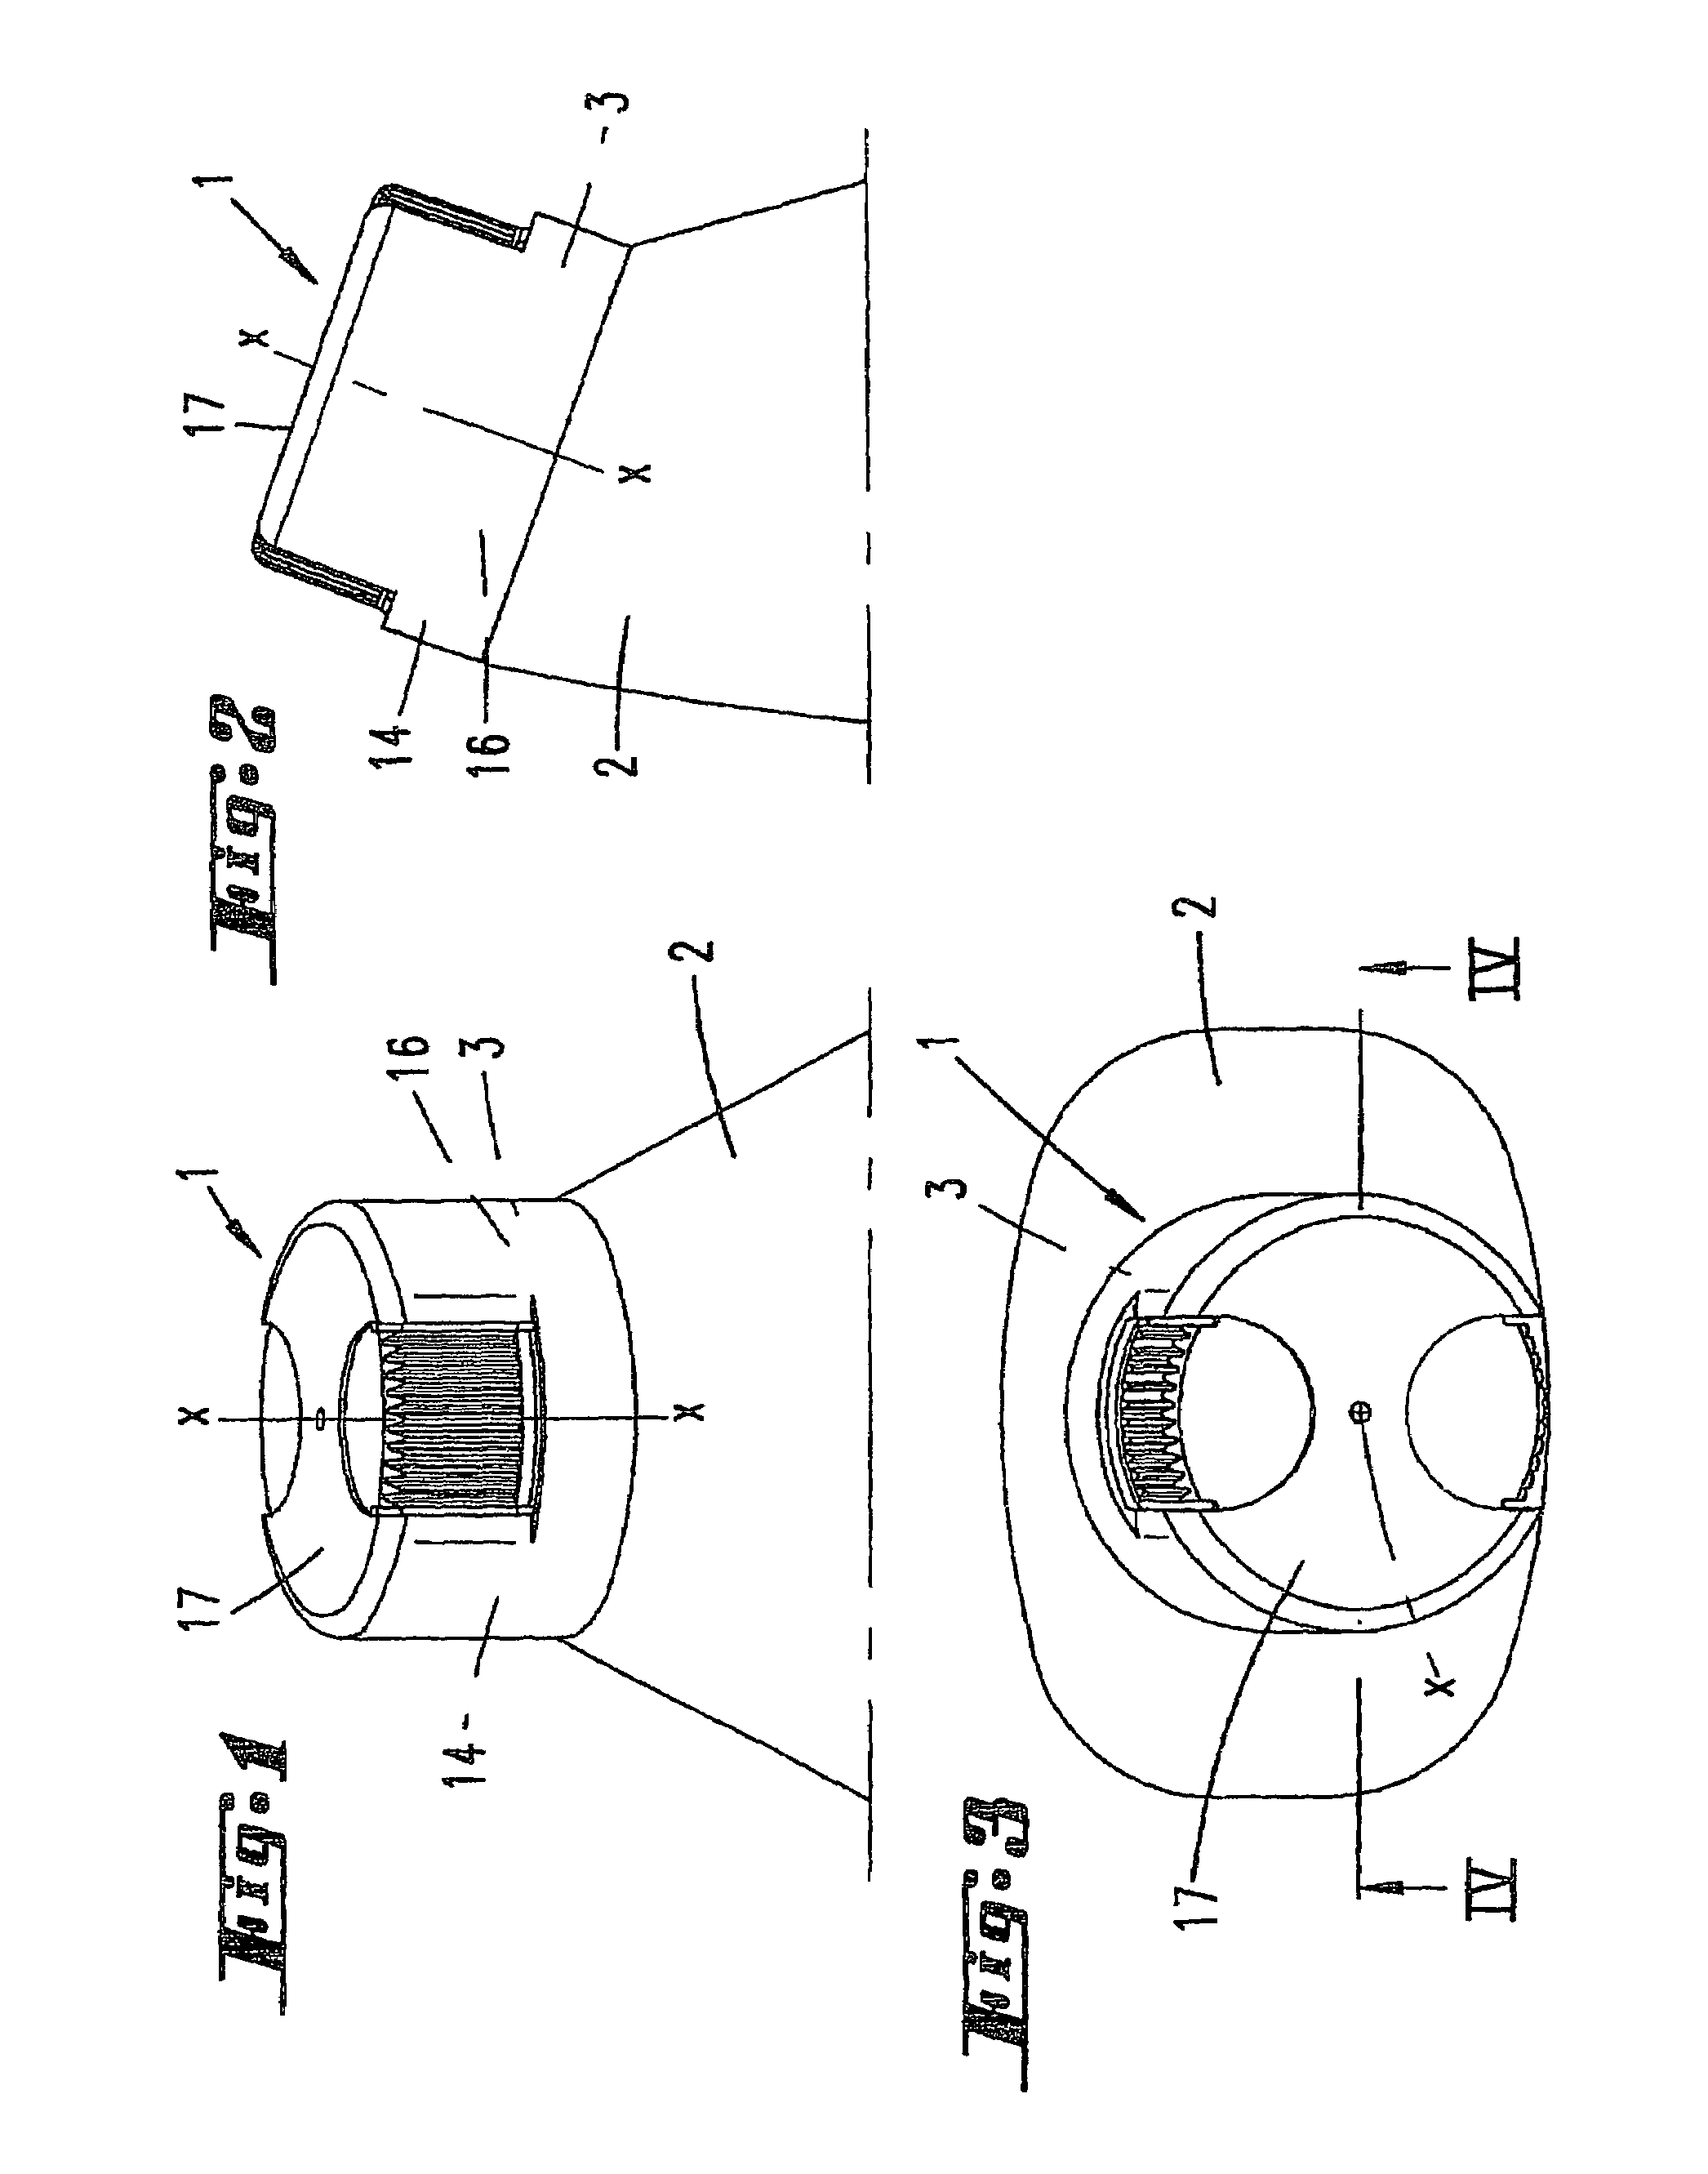 Closure cap for closing non-rotationally symmetrical or eccentric mouthpiece openings of bottle containers